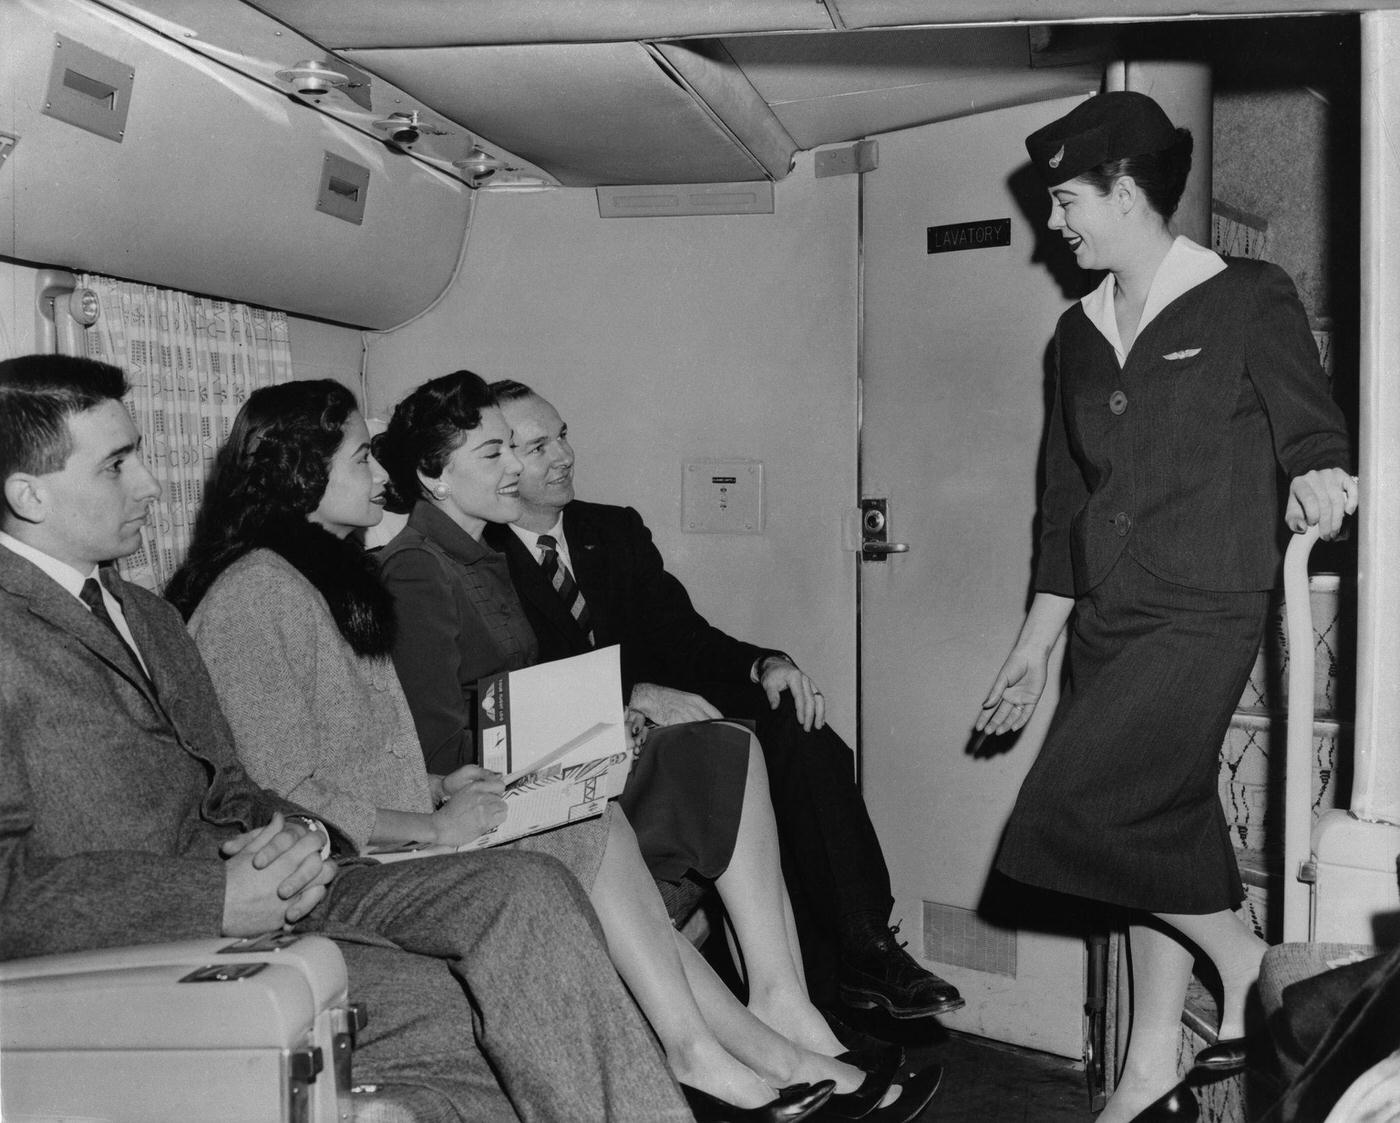 An air hostess engages in conversation with passengers on a Transocean Air Lines Boeing 377 Stratocruiser in the mid1950s.